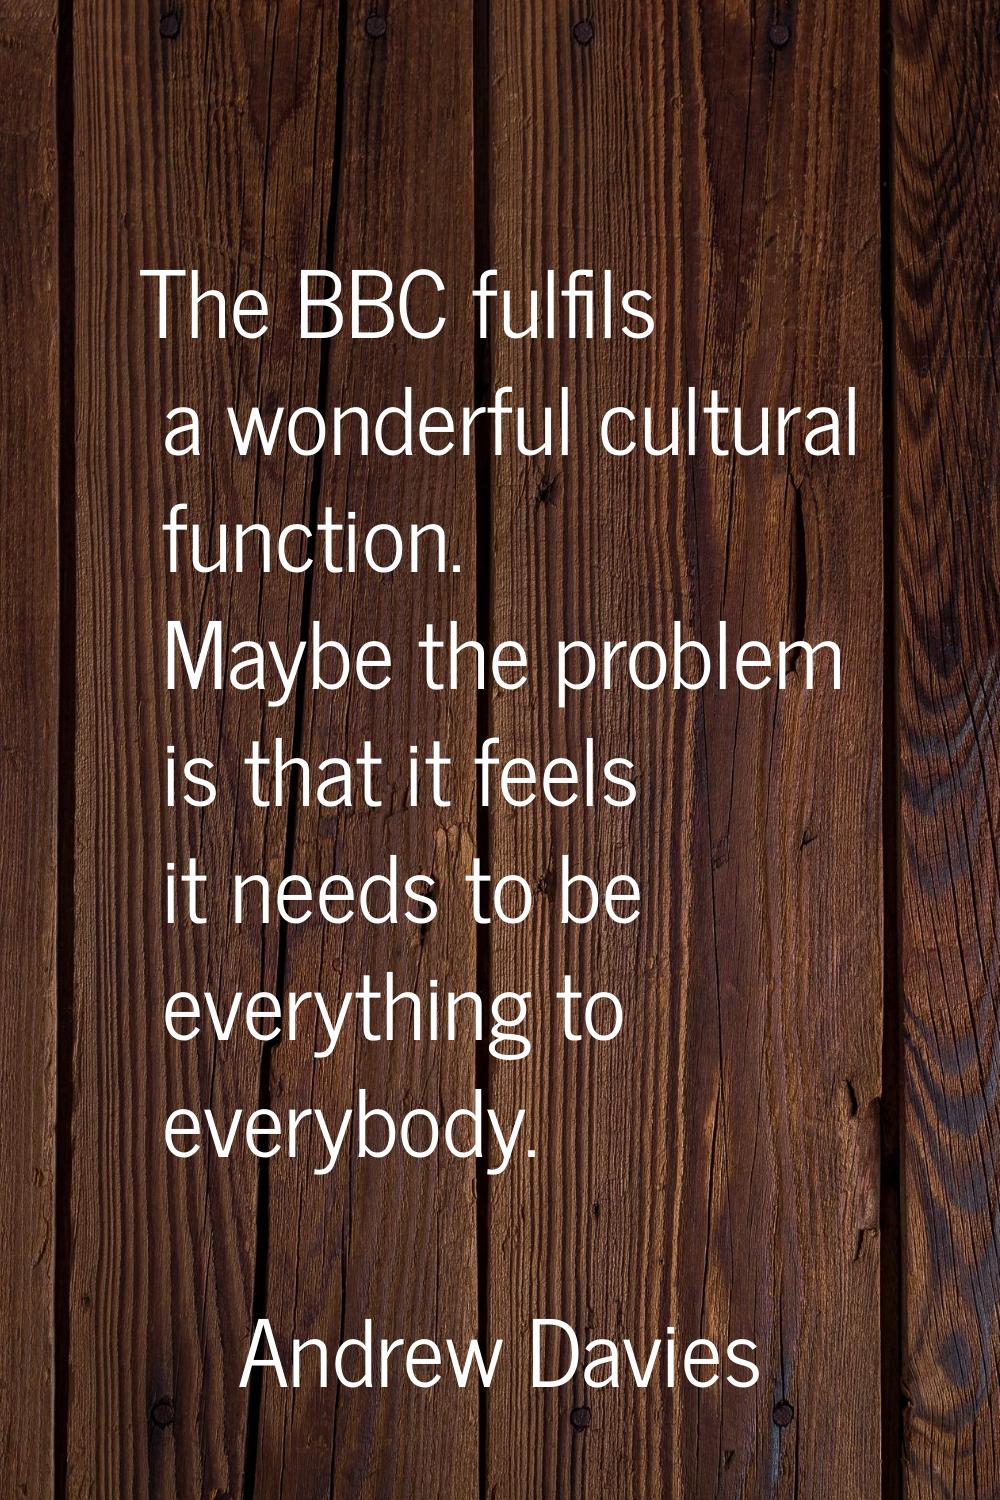 The BBC fulfils a wonderful cultural function. Maybe the problem is that it feels it needs to be ev